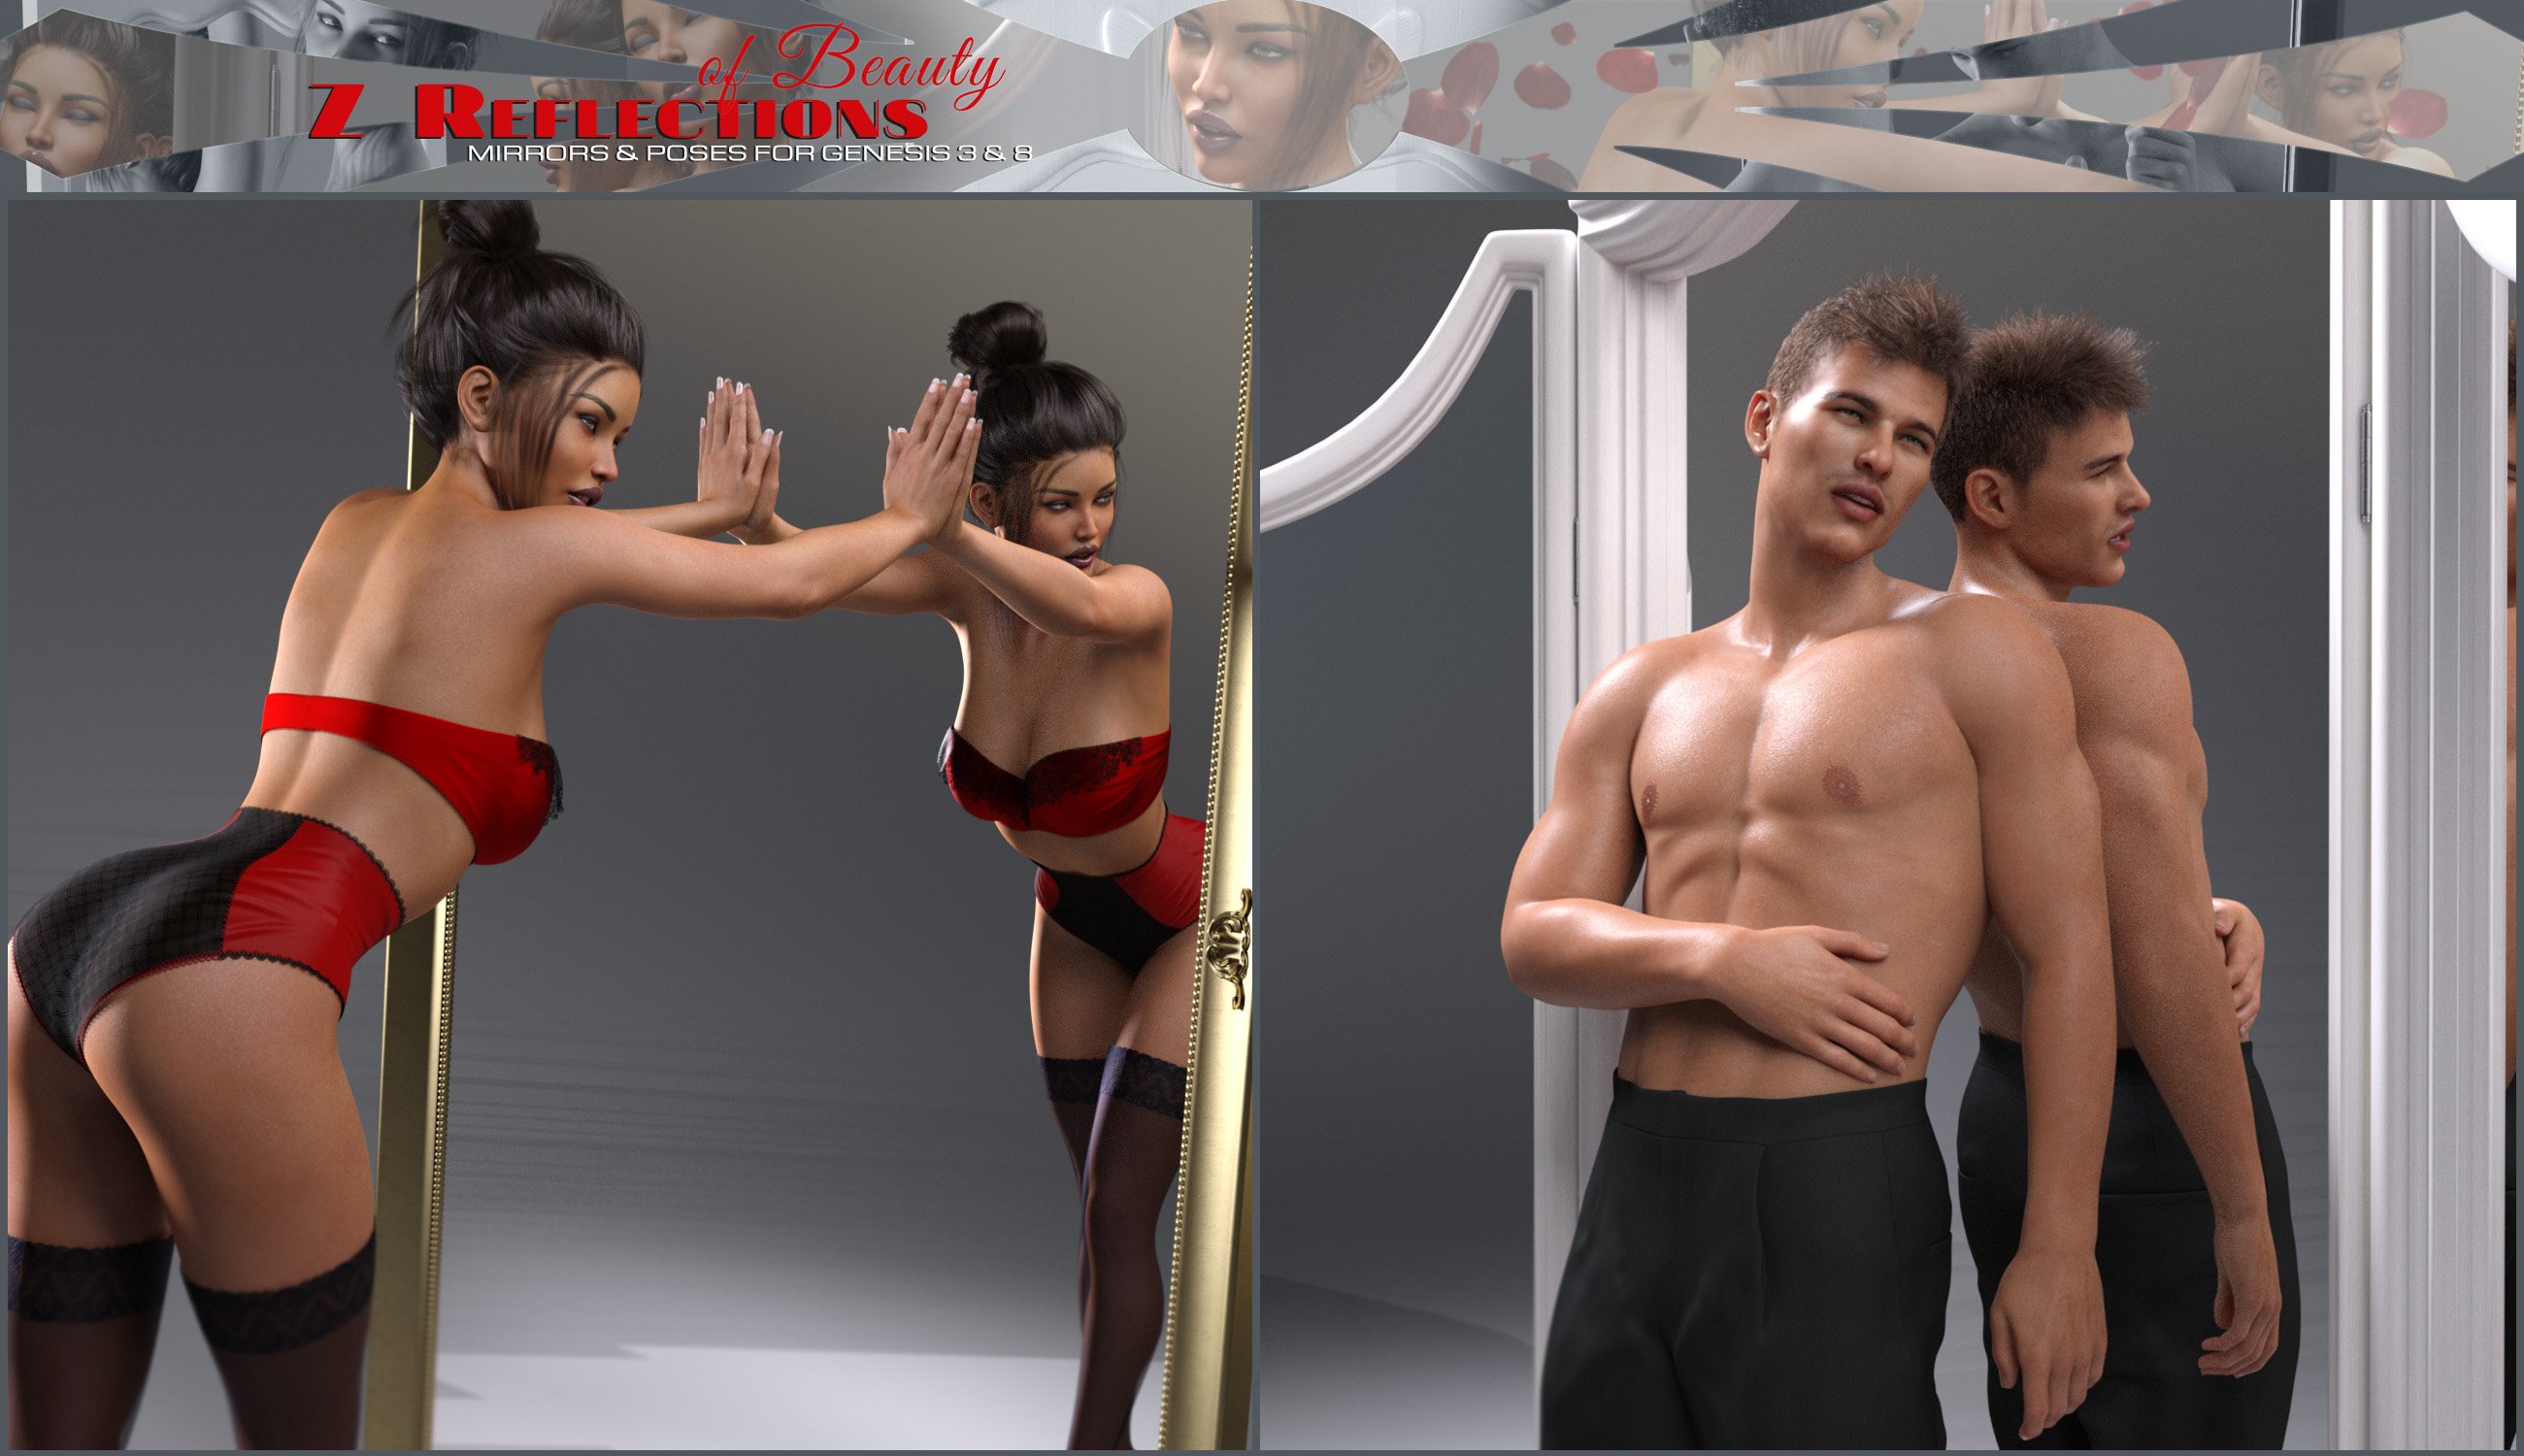 Z Reflections of Beauty Mirrors and Poses for Genesis 3 and 8 by: Zeddicuss, 3D Models by Daz 3D